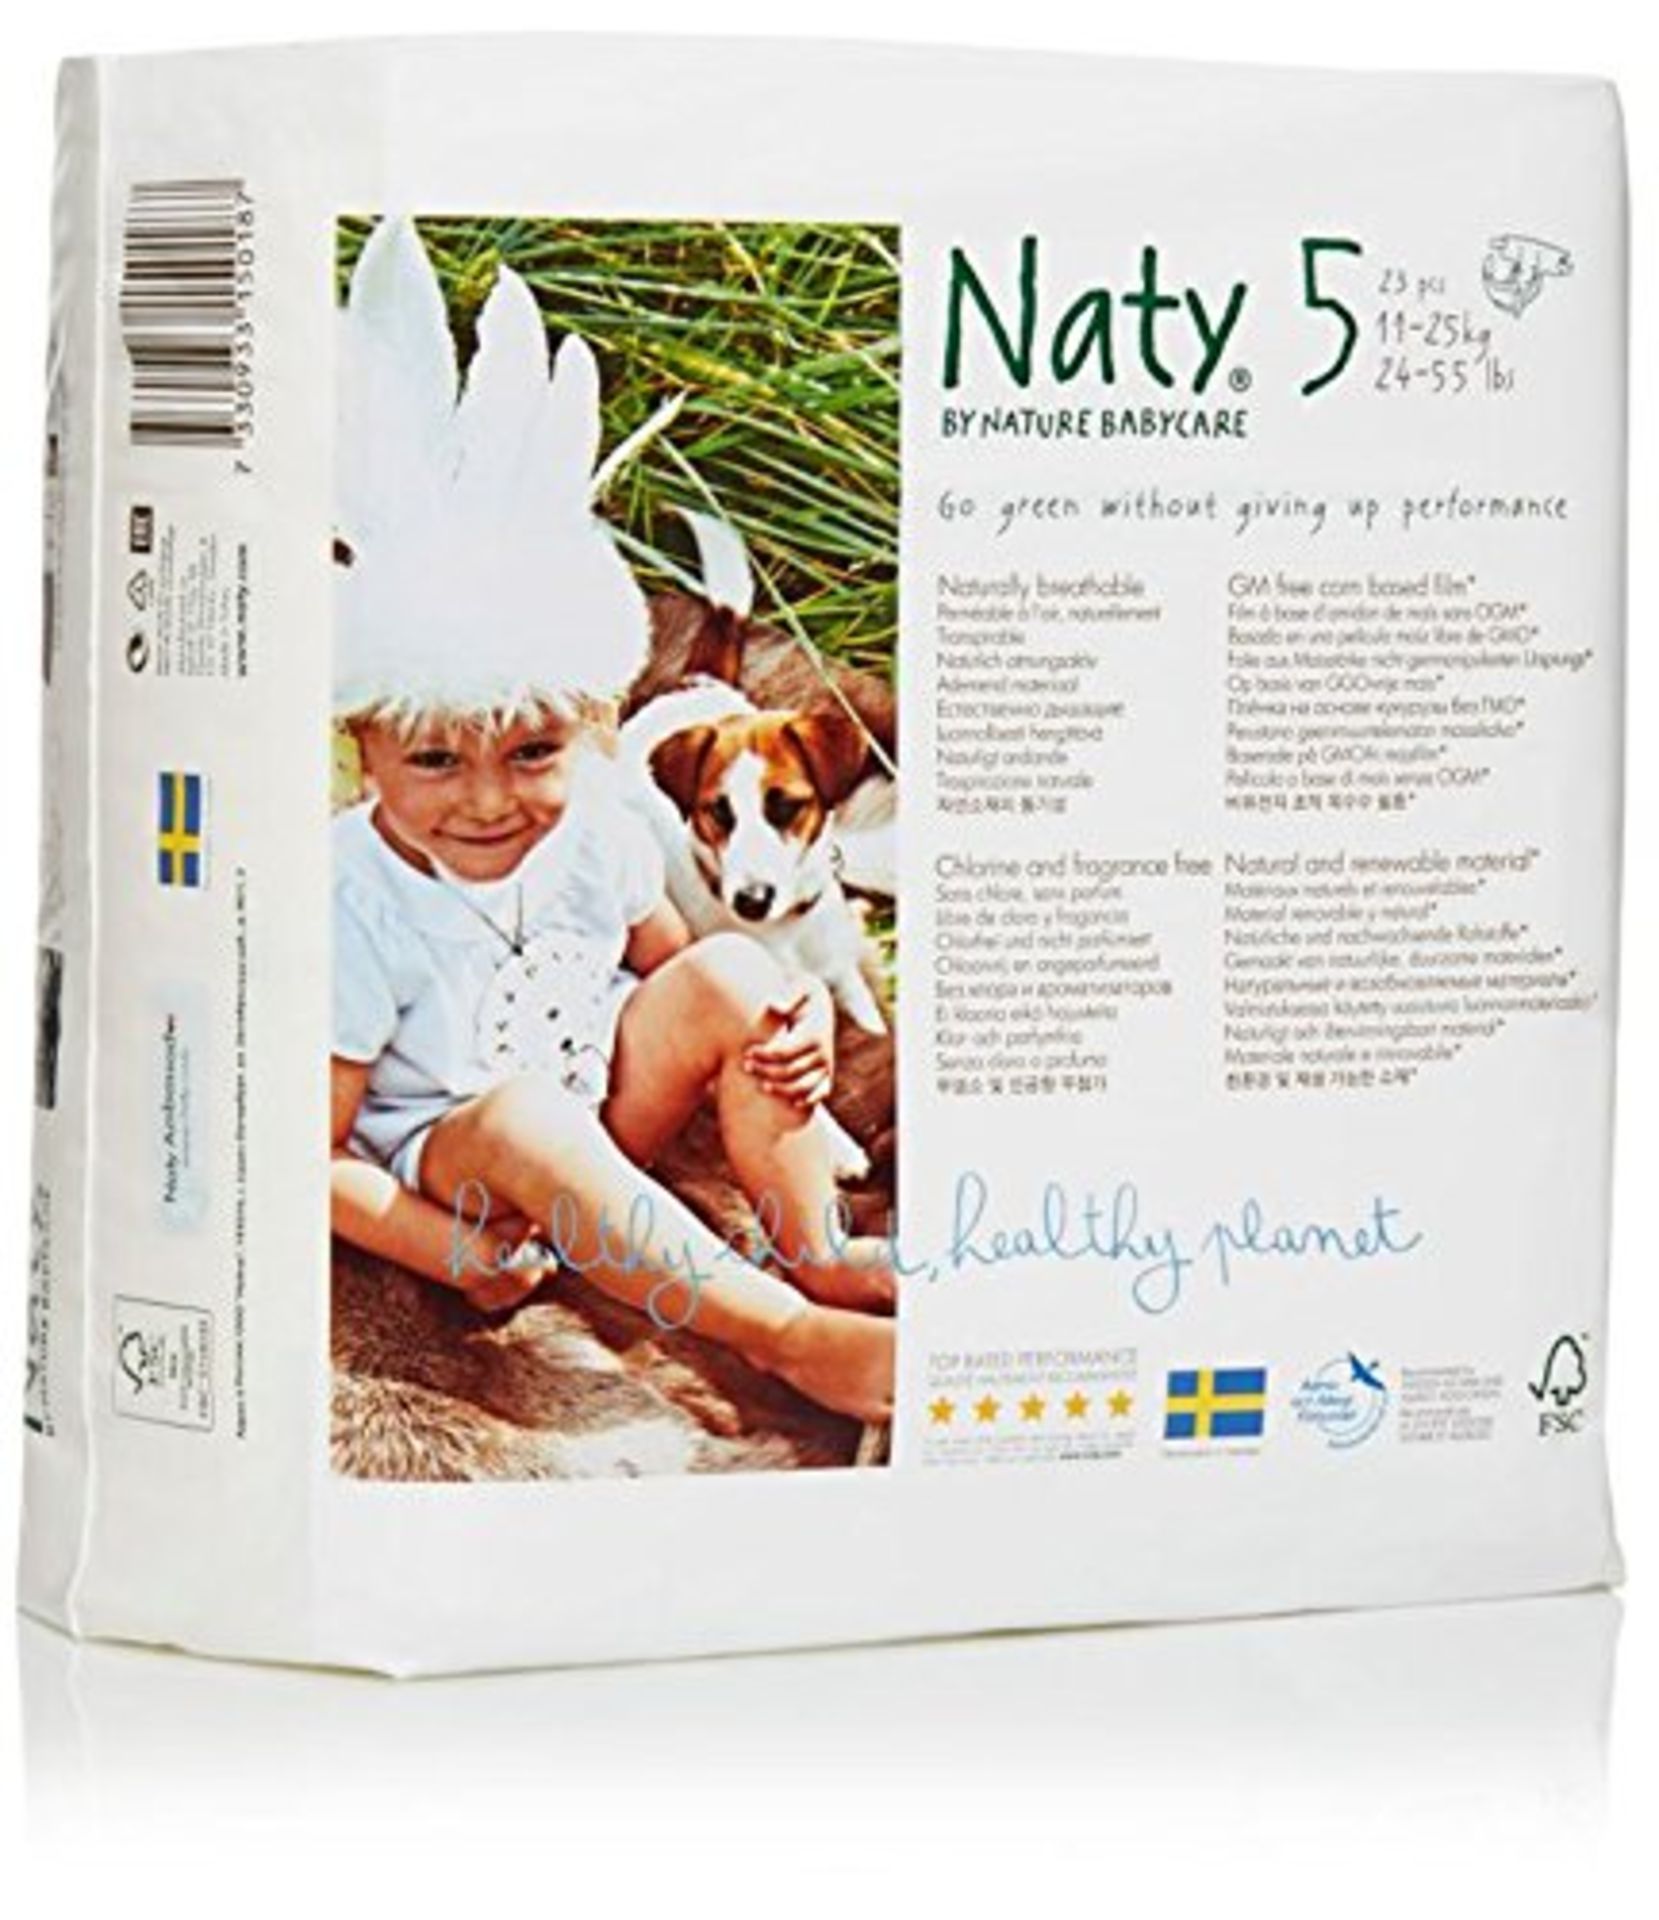 1 Box of 2 units , Containing Baby Products - Box Number 'BABY 230' - Latest AMZ price £36.89 - Naty - Image 2 of 2